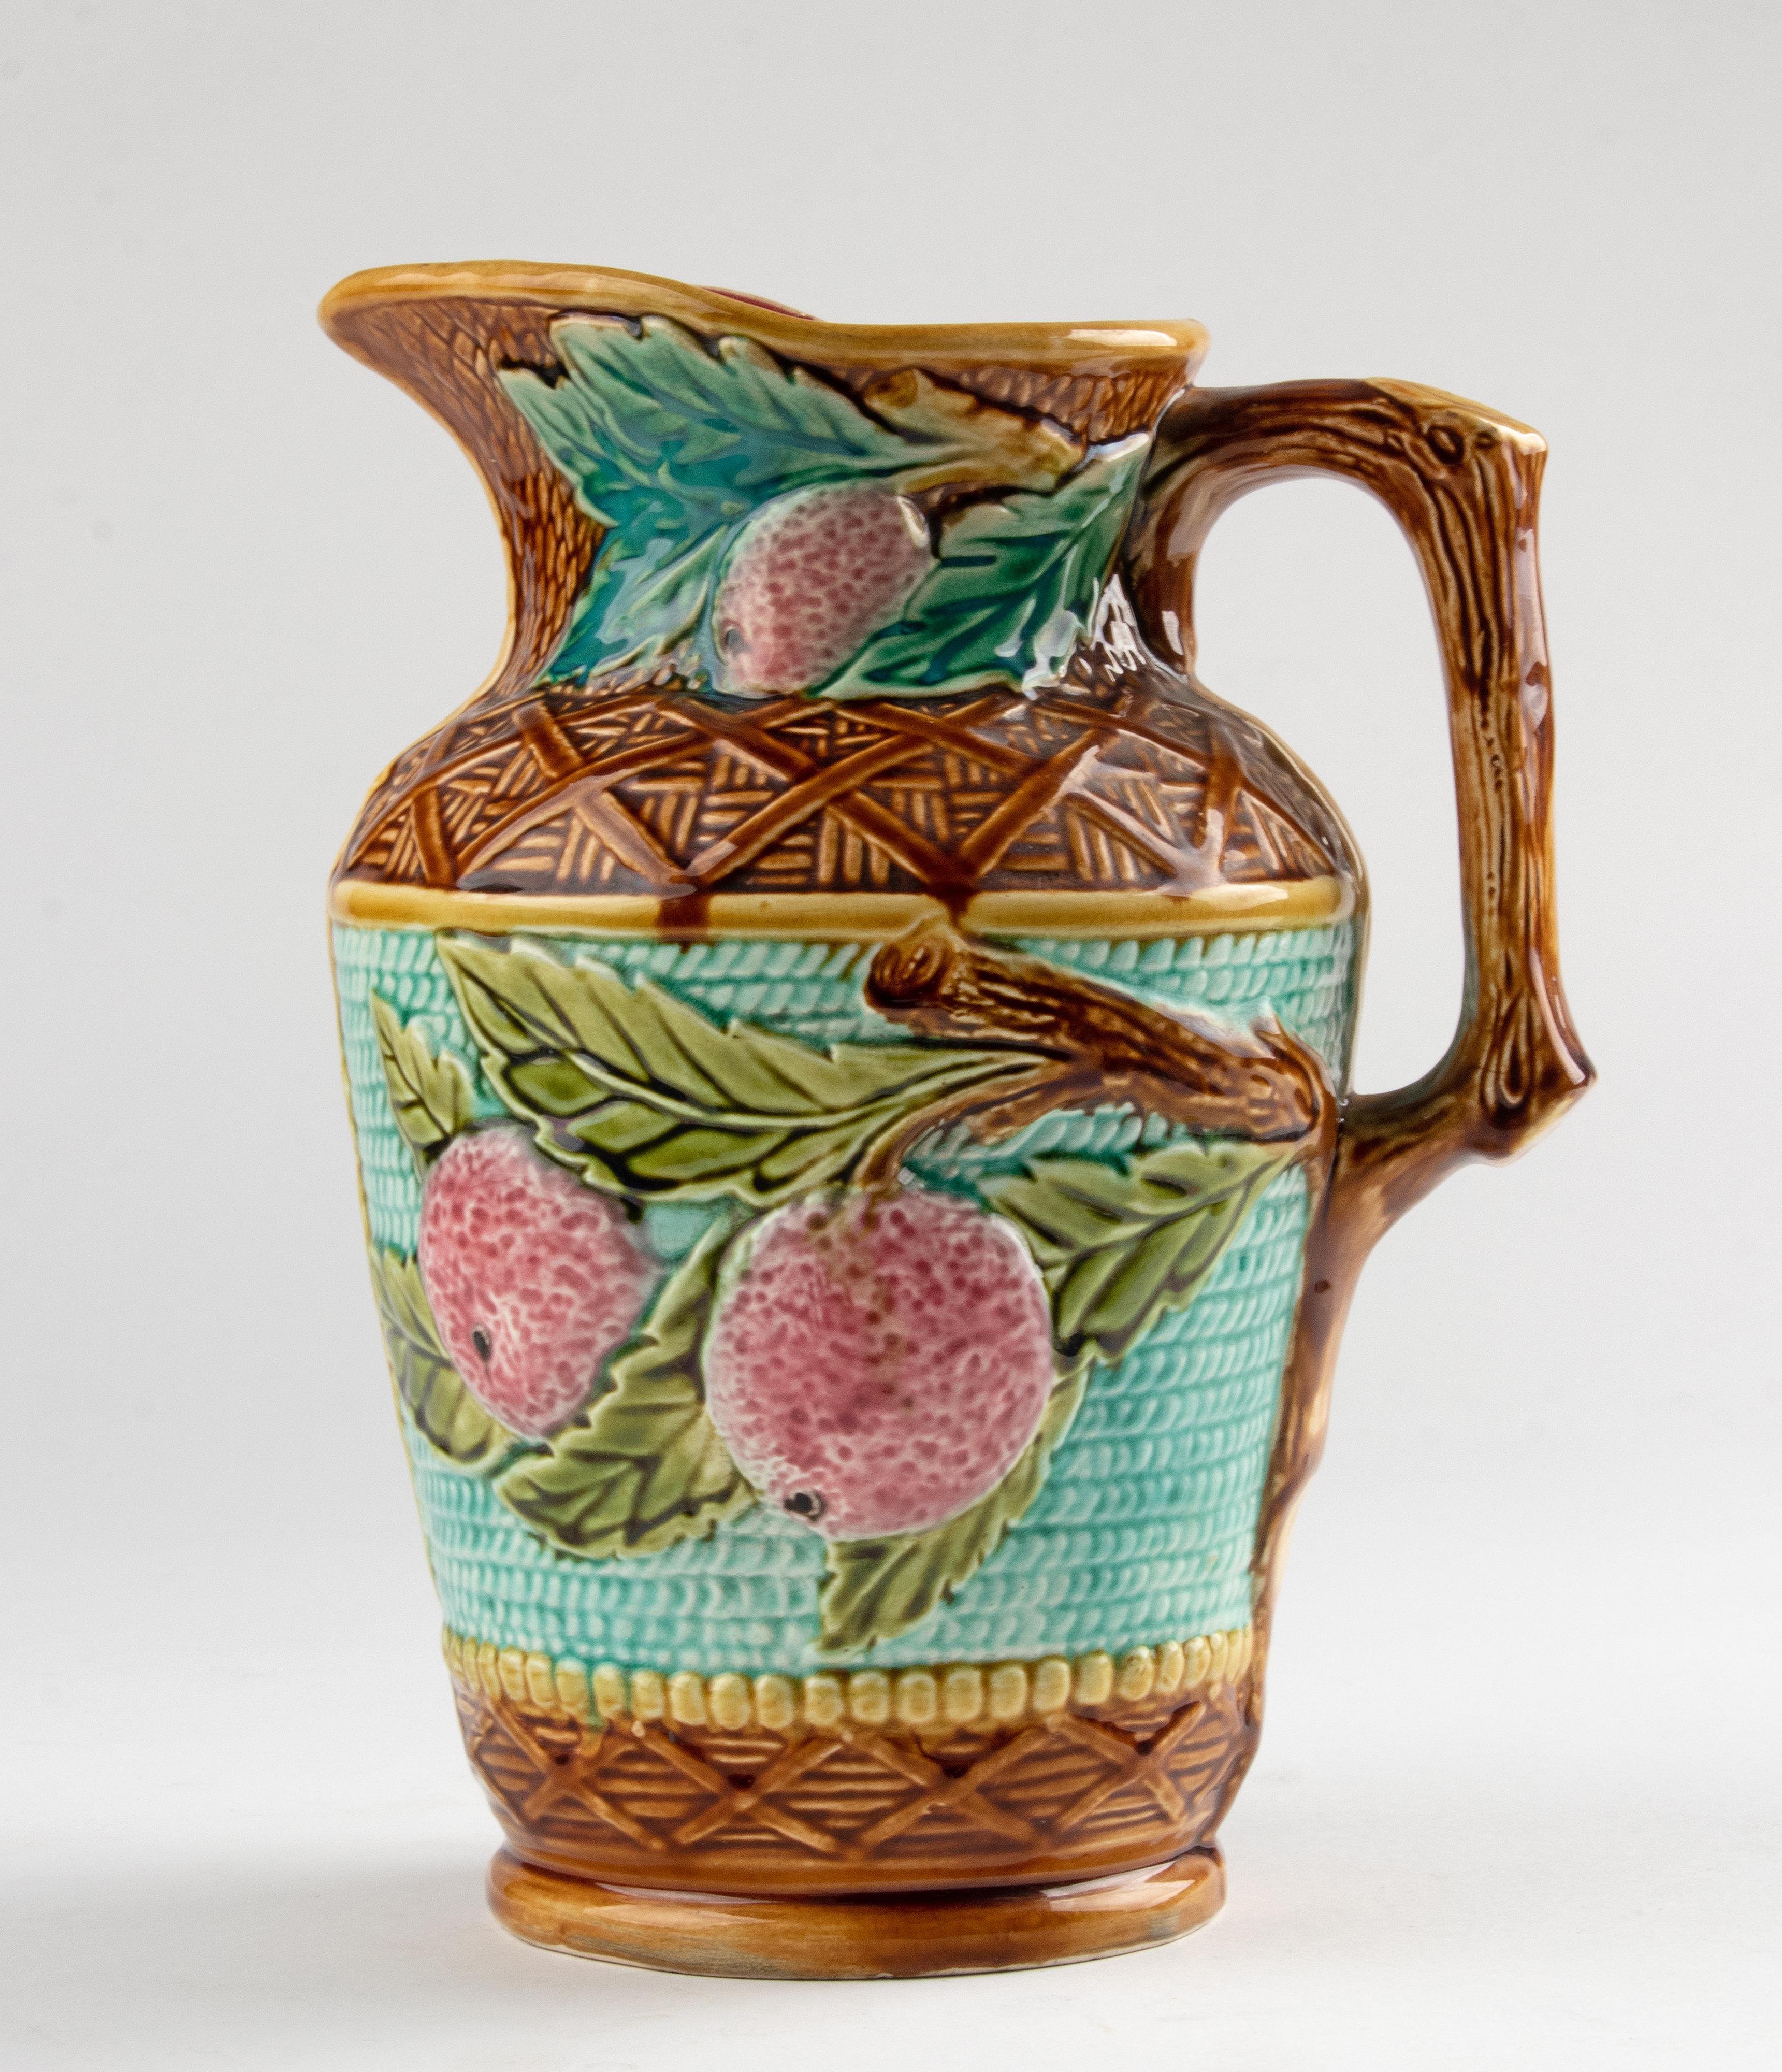 Large Majolica Ceramic Pitcher. Decorated with a pattern of apples. With very bright colors. 
Most likely a production from the Belgian brand Nimy. The pitcher is in good condition. No chips and no hairlines. On the bottom of small line (see